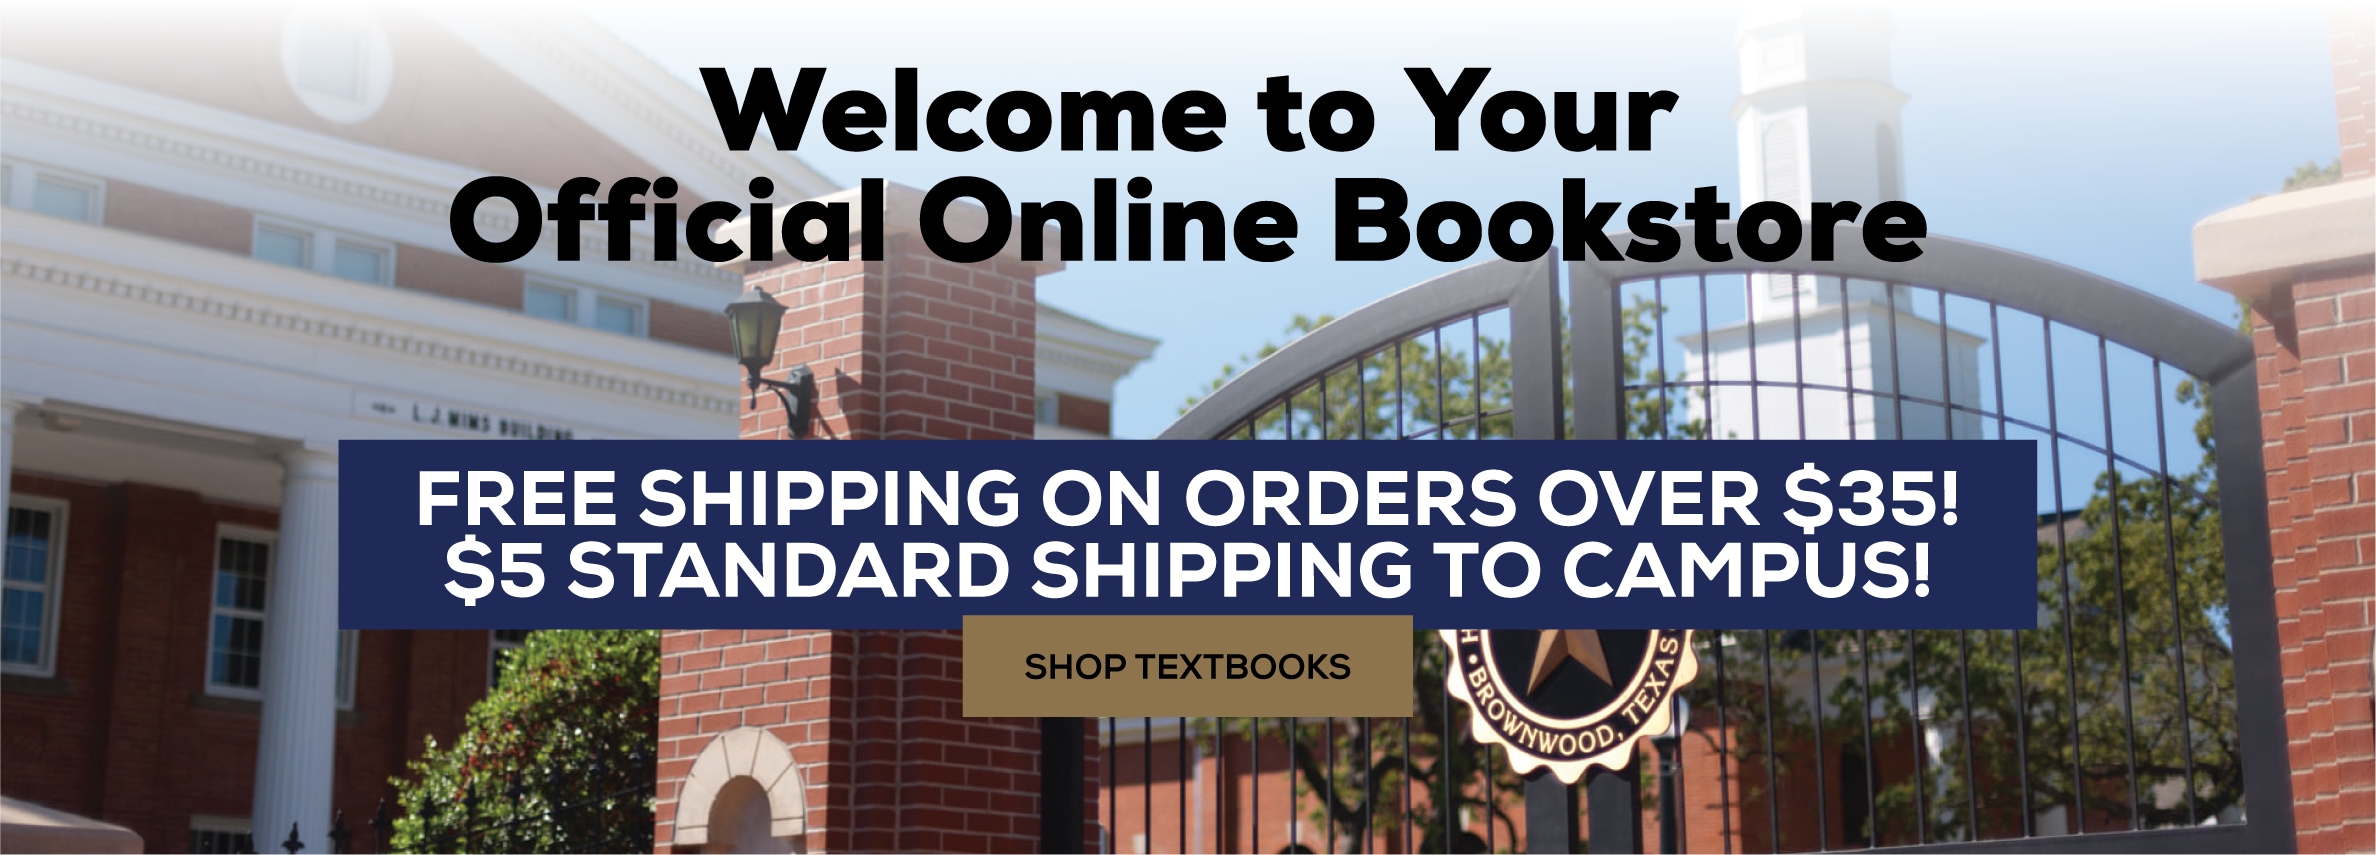 Welcome to your official online bookstore. Free shipping on orders over $35 and $5 standard shipping to campus! Shop textbooks.